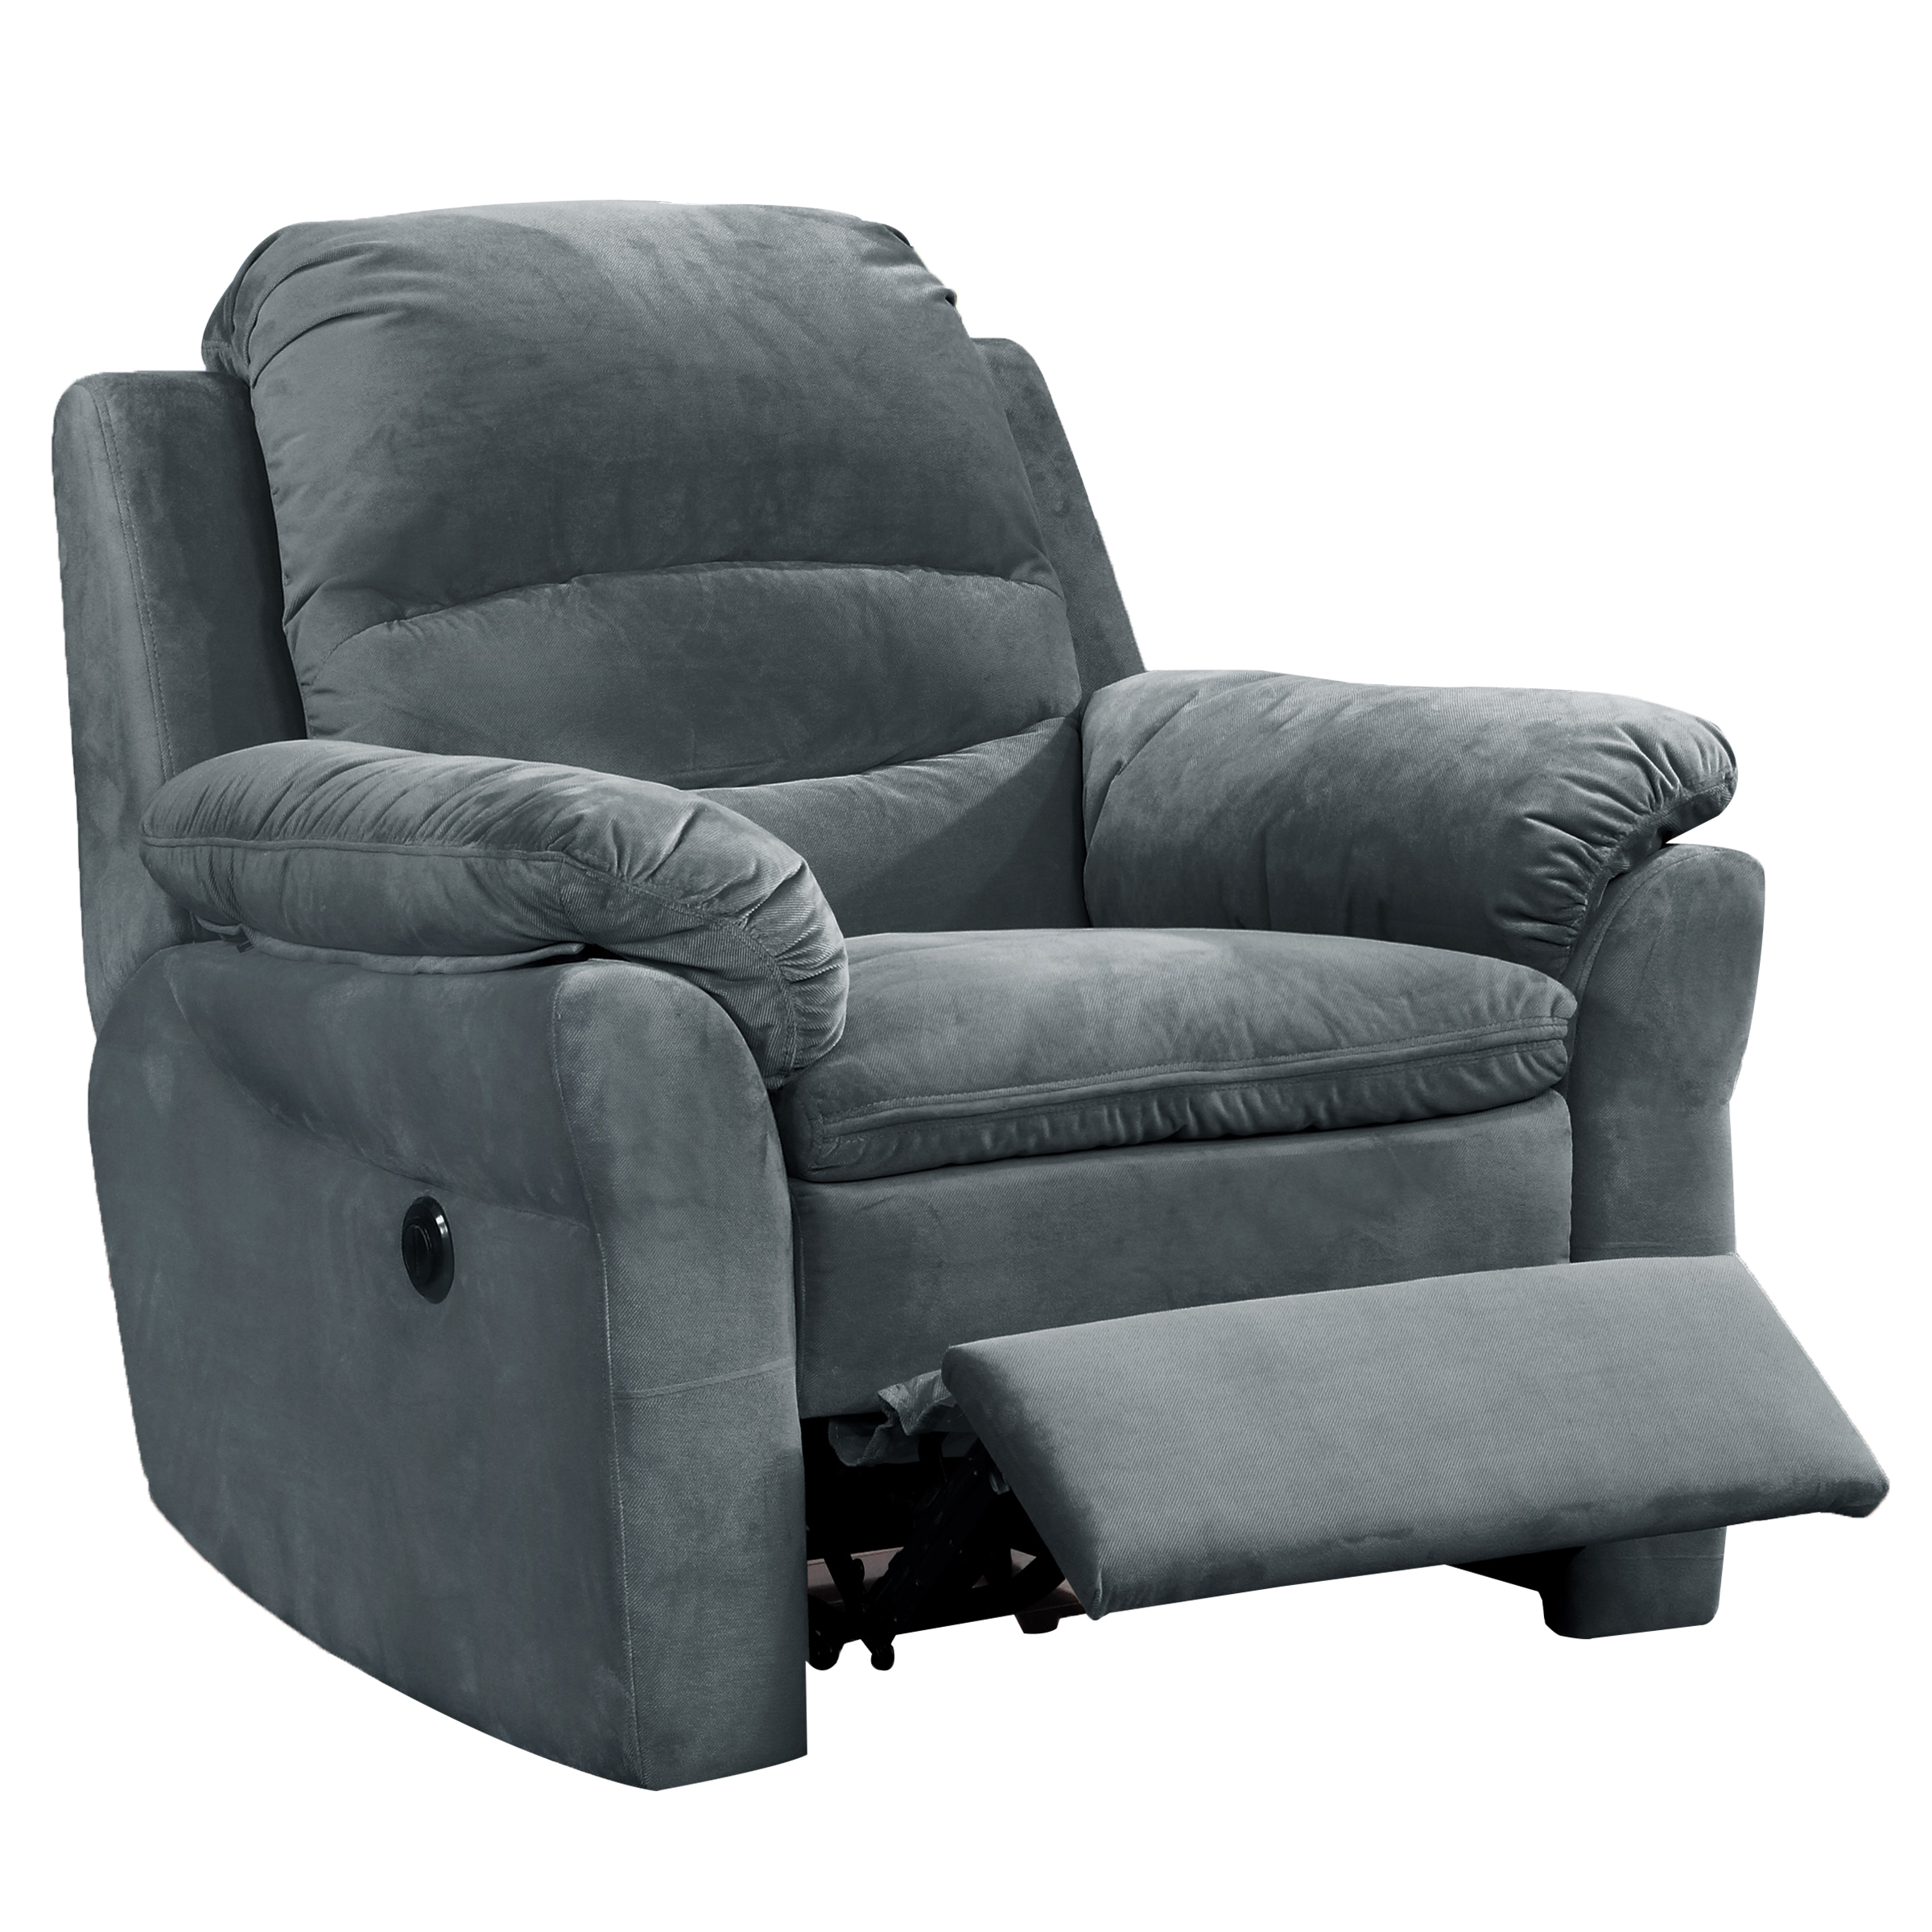 Fabric Upholstered Electric Recliner Power Chair Christies Home Living